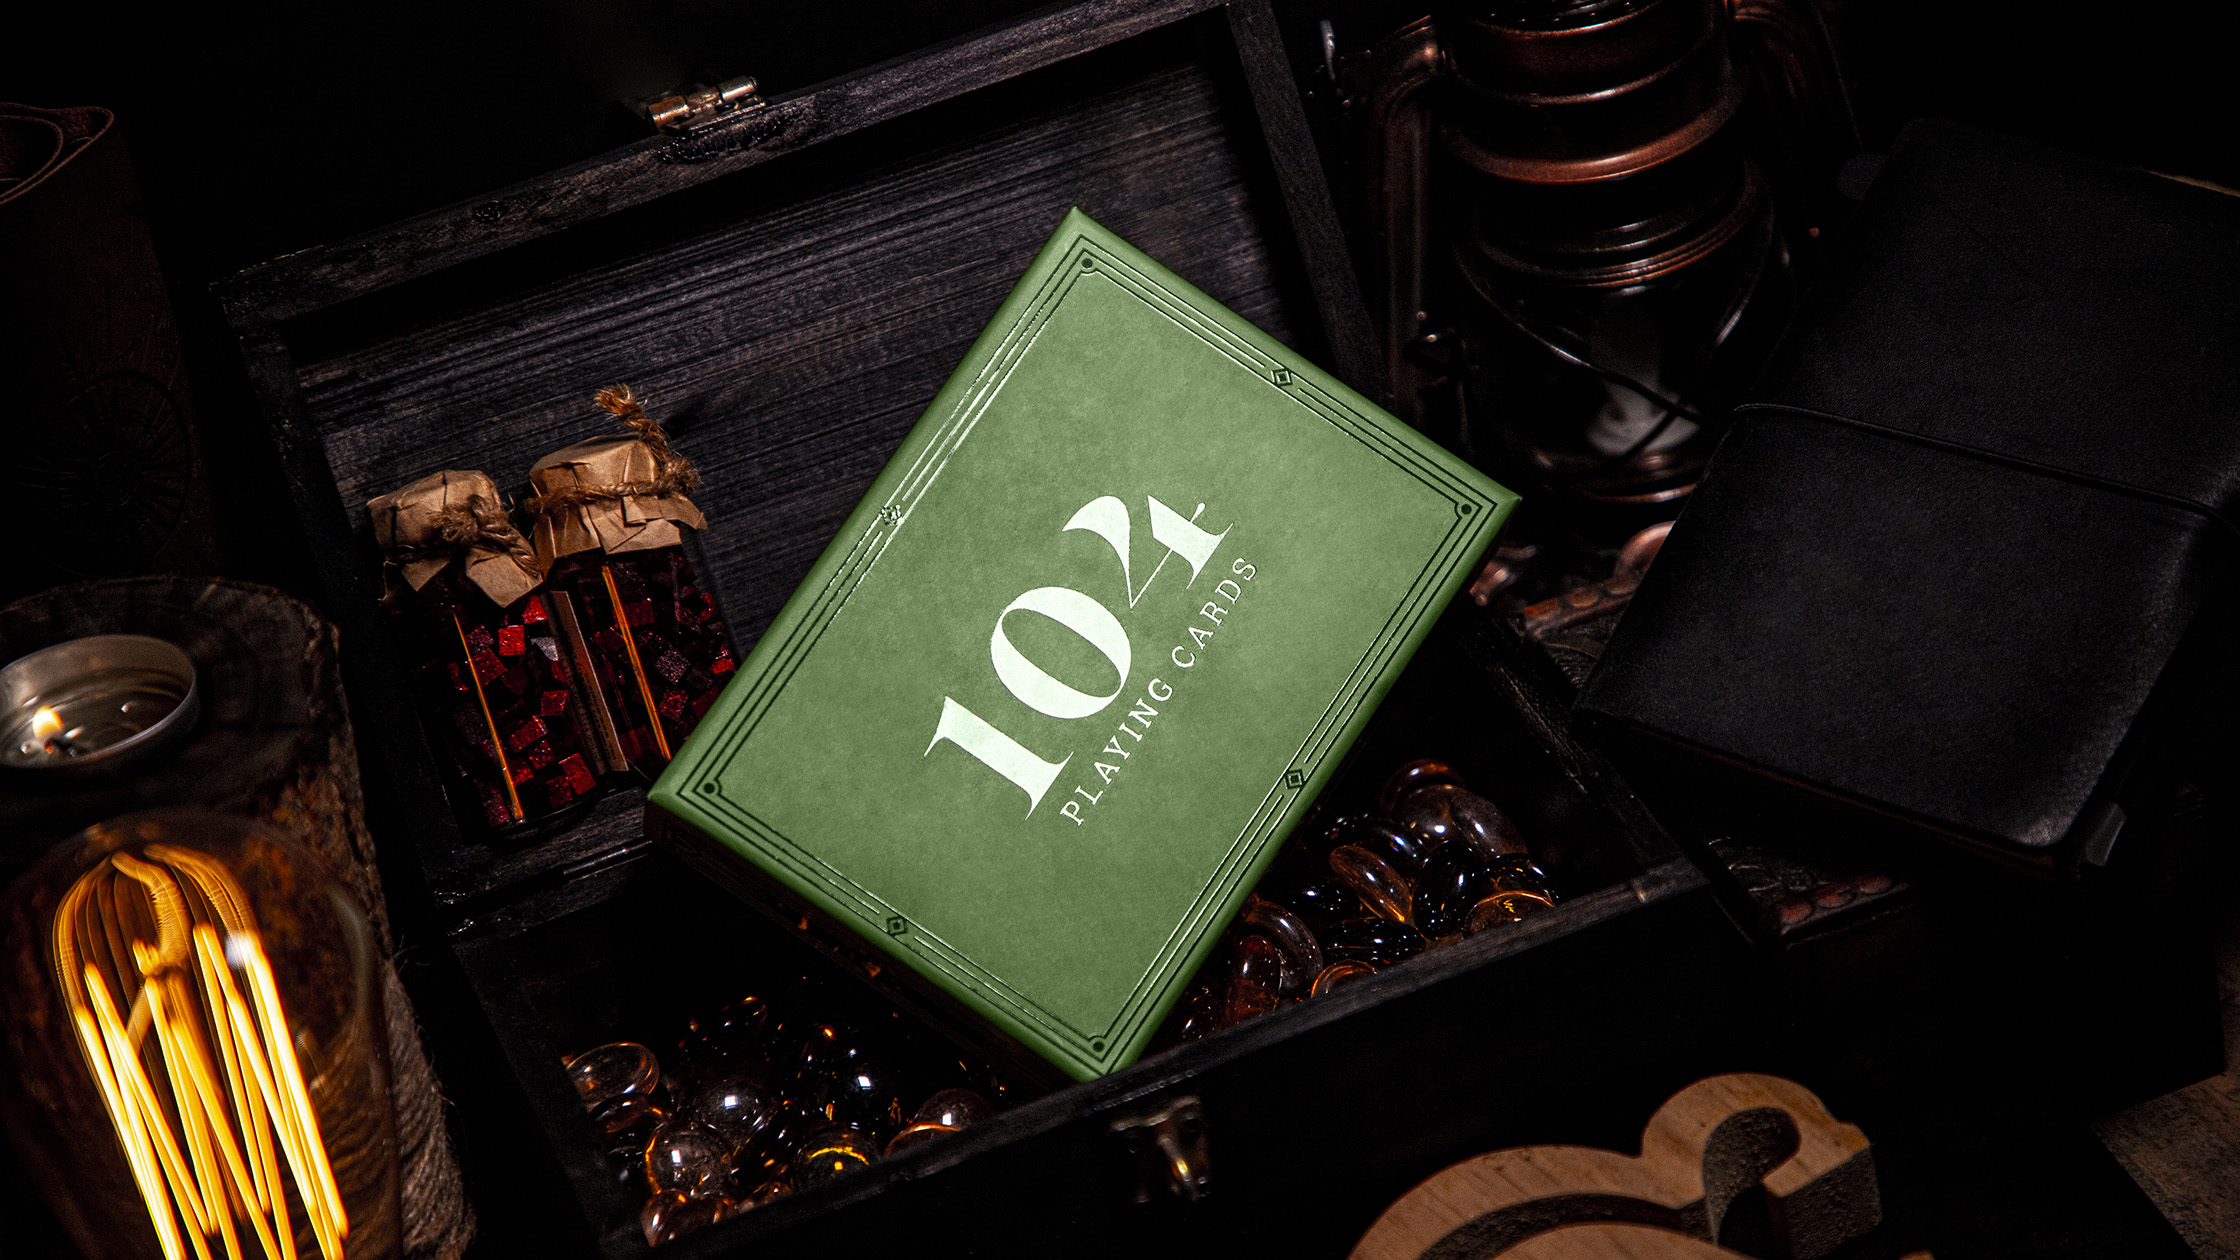 Tuyệt Duyệt Creates 104 Playing Cards Limited Edition for Cloever Co. & Game by Yanni Co.